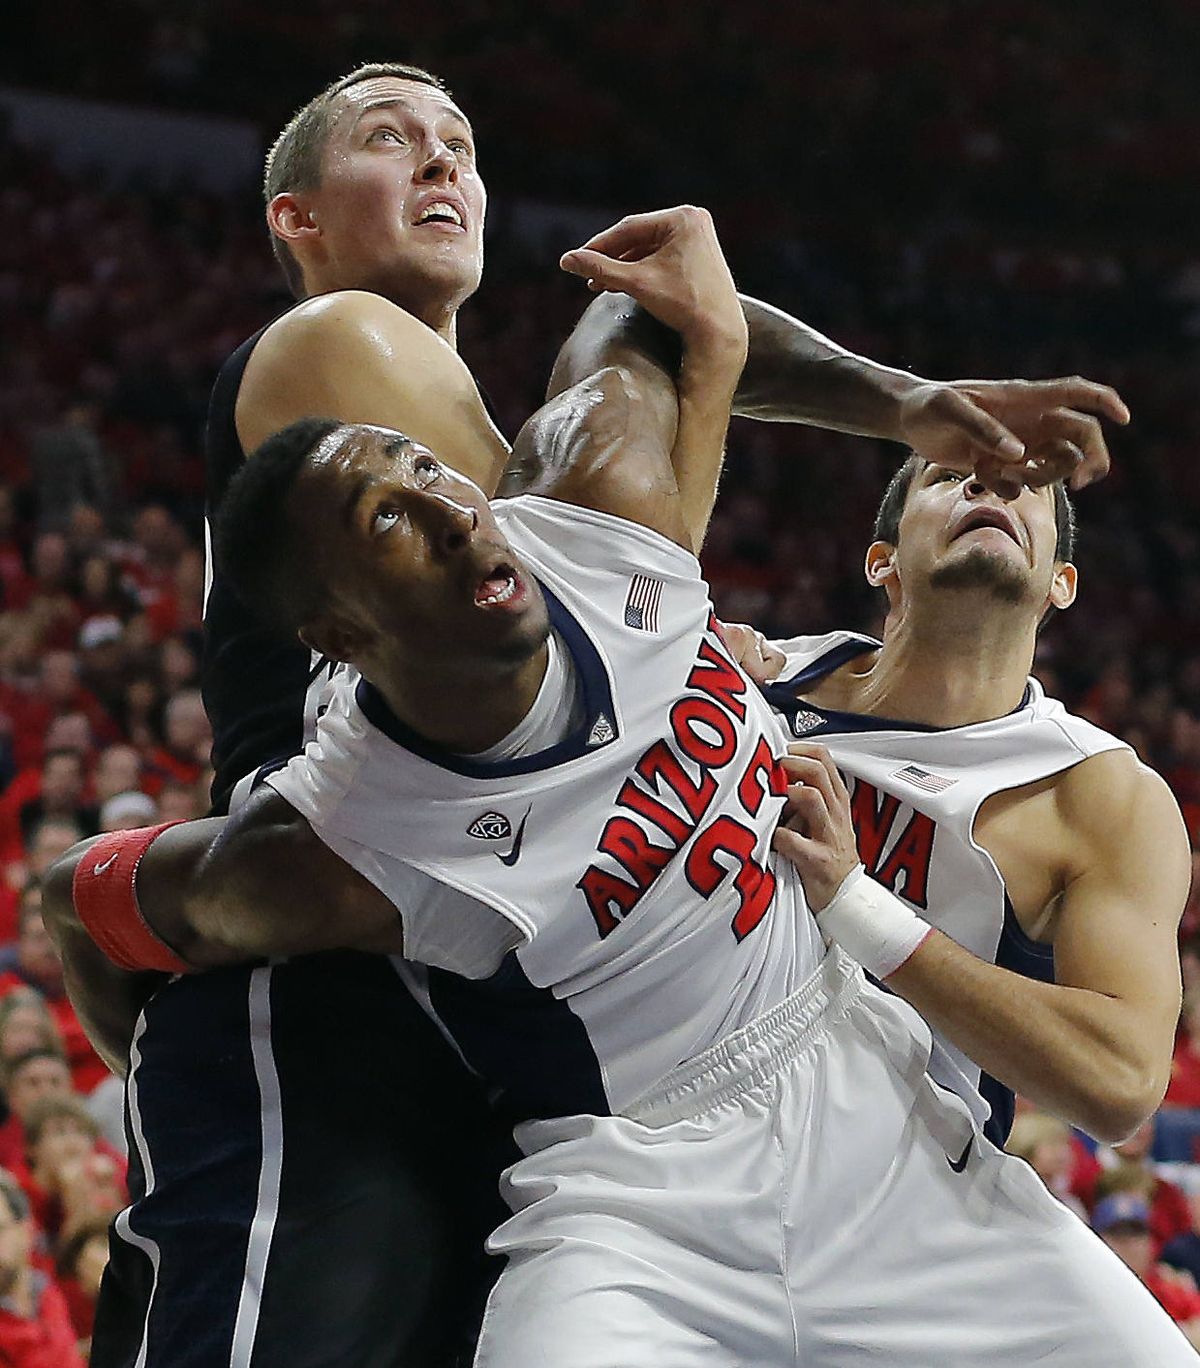 UA’s Rondae Hollis-Jefferson boxes out during the first half. (Associated Press)